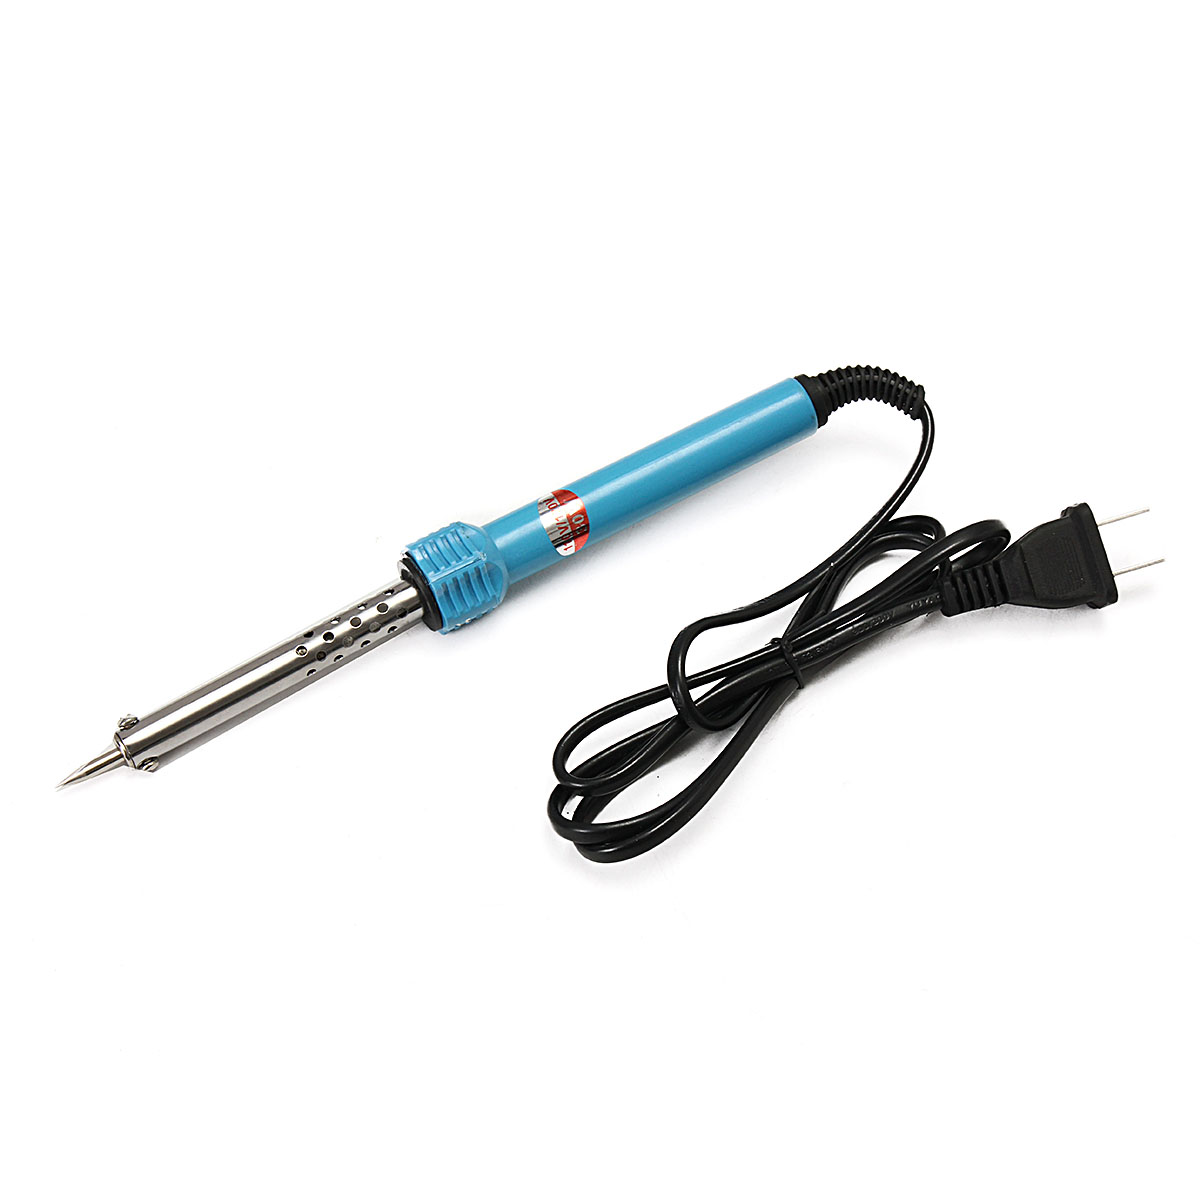 17in1-Electric-Soldering-Tools-Kit-Set-Iron-Stand-Desoldering-Pump-30W-110V-1300343-4